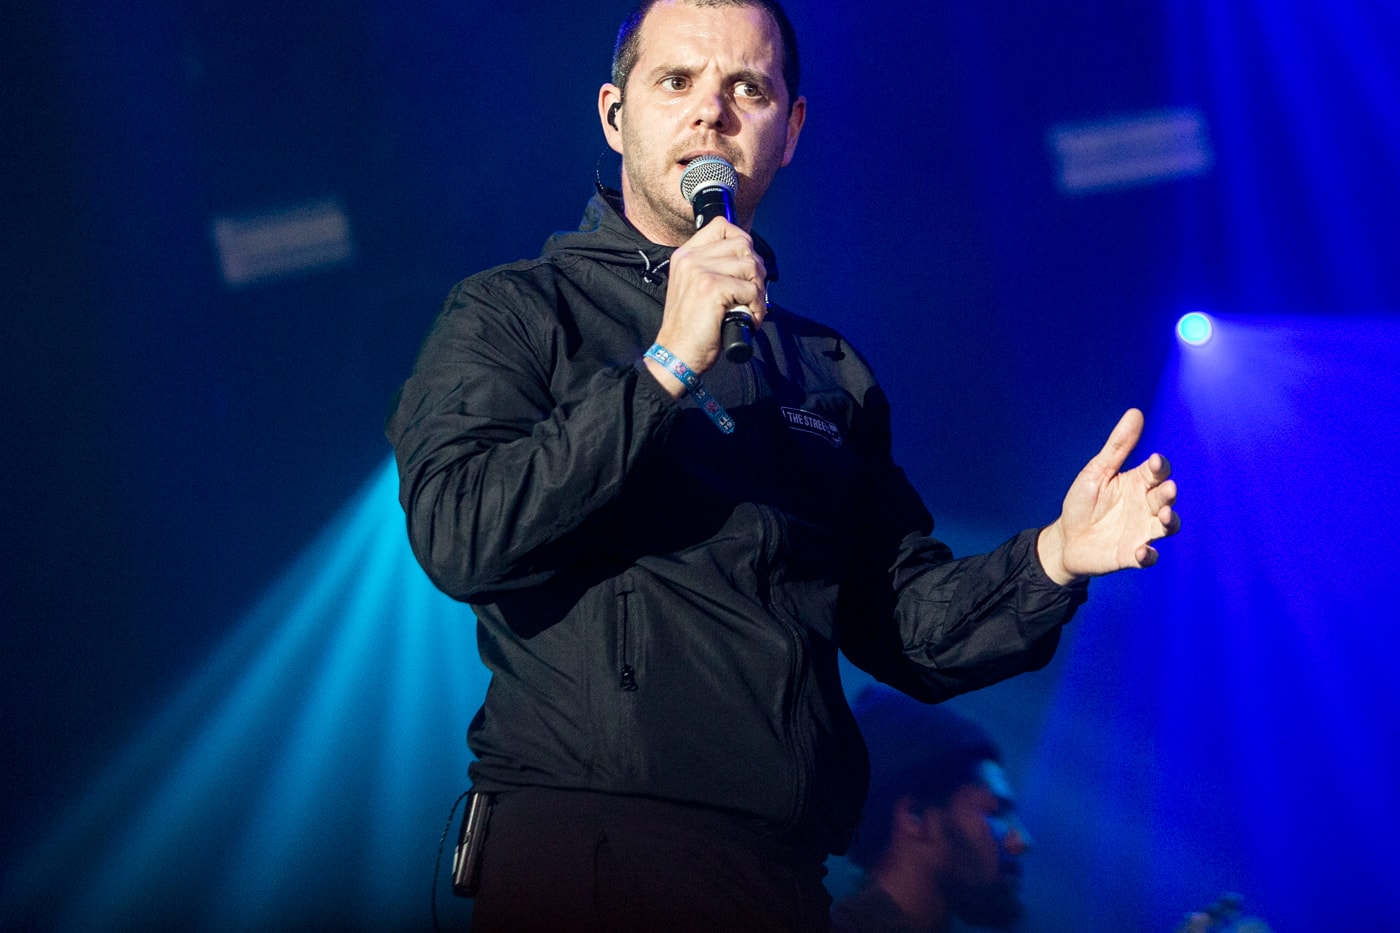 The Streets Mike Skinner Album Leak Single Music Video EP Mixtape Download Stream Discography 2018 Live Show Performance Tour Dates Album Review Tracklist Remix